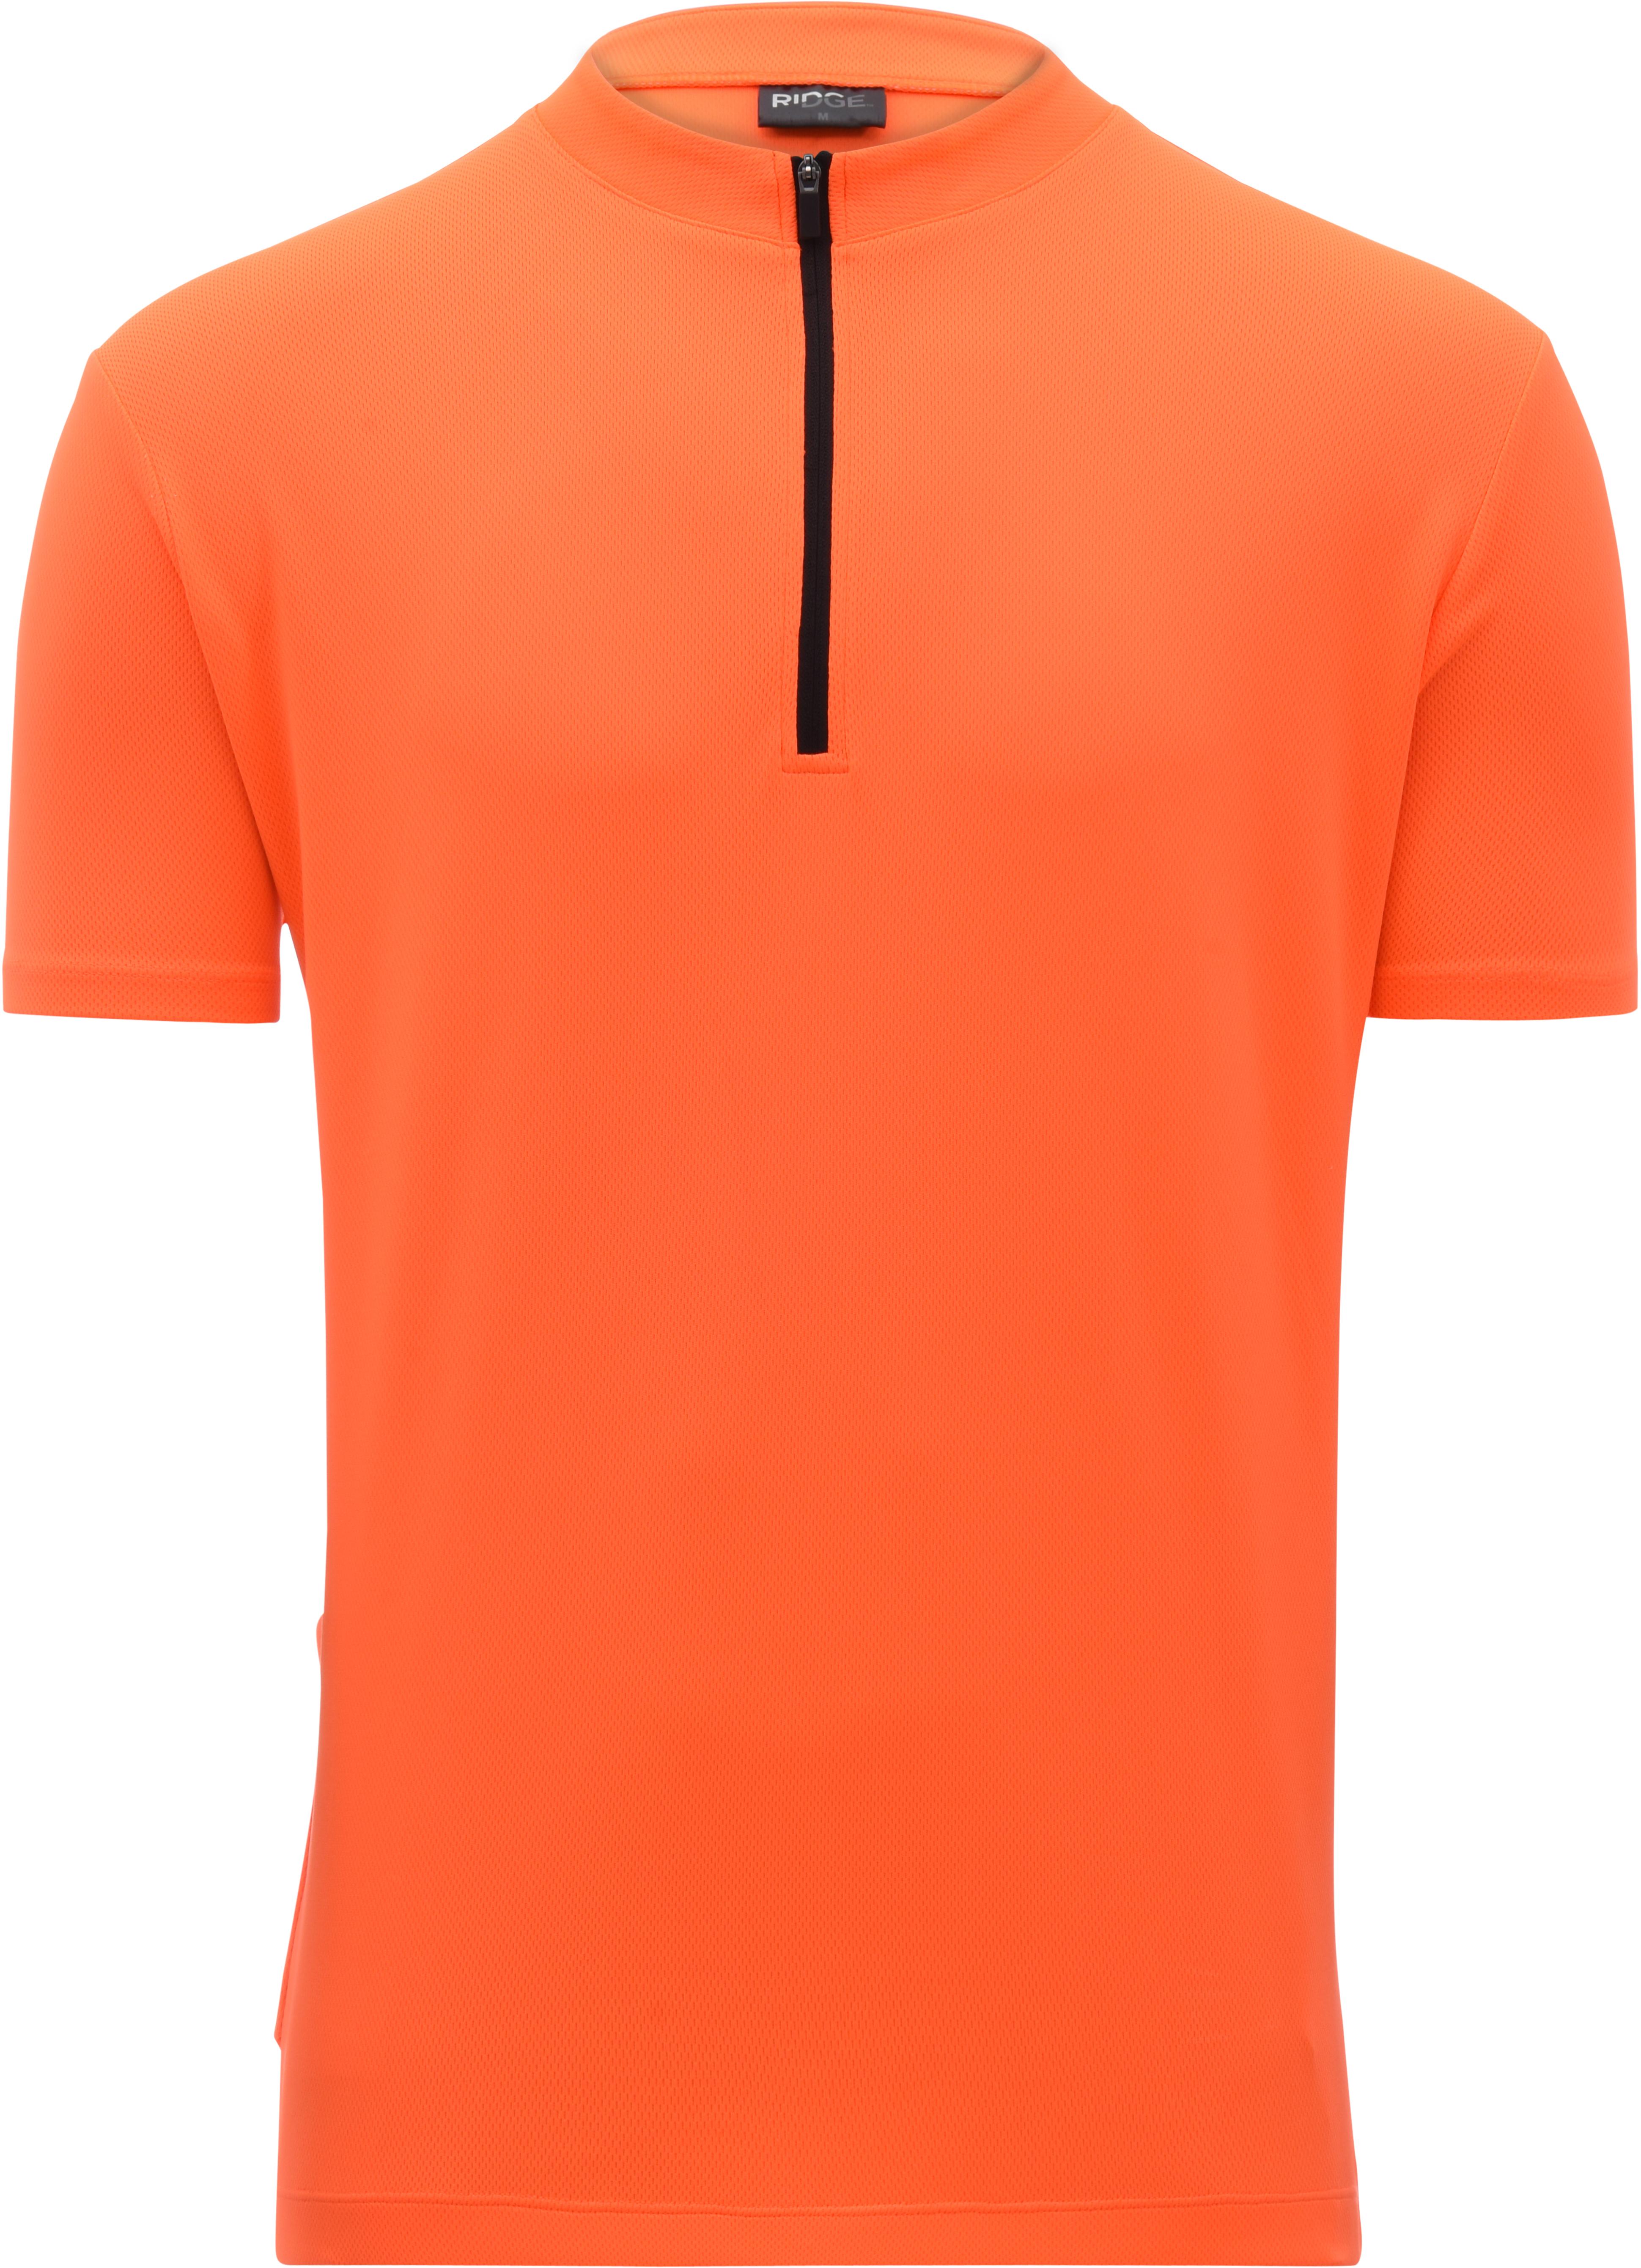 halfords cycling tops